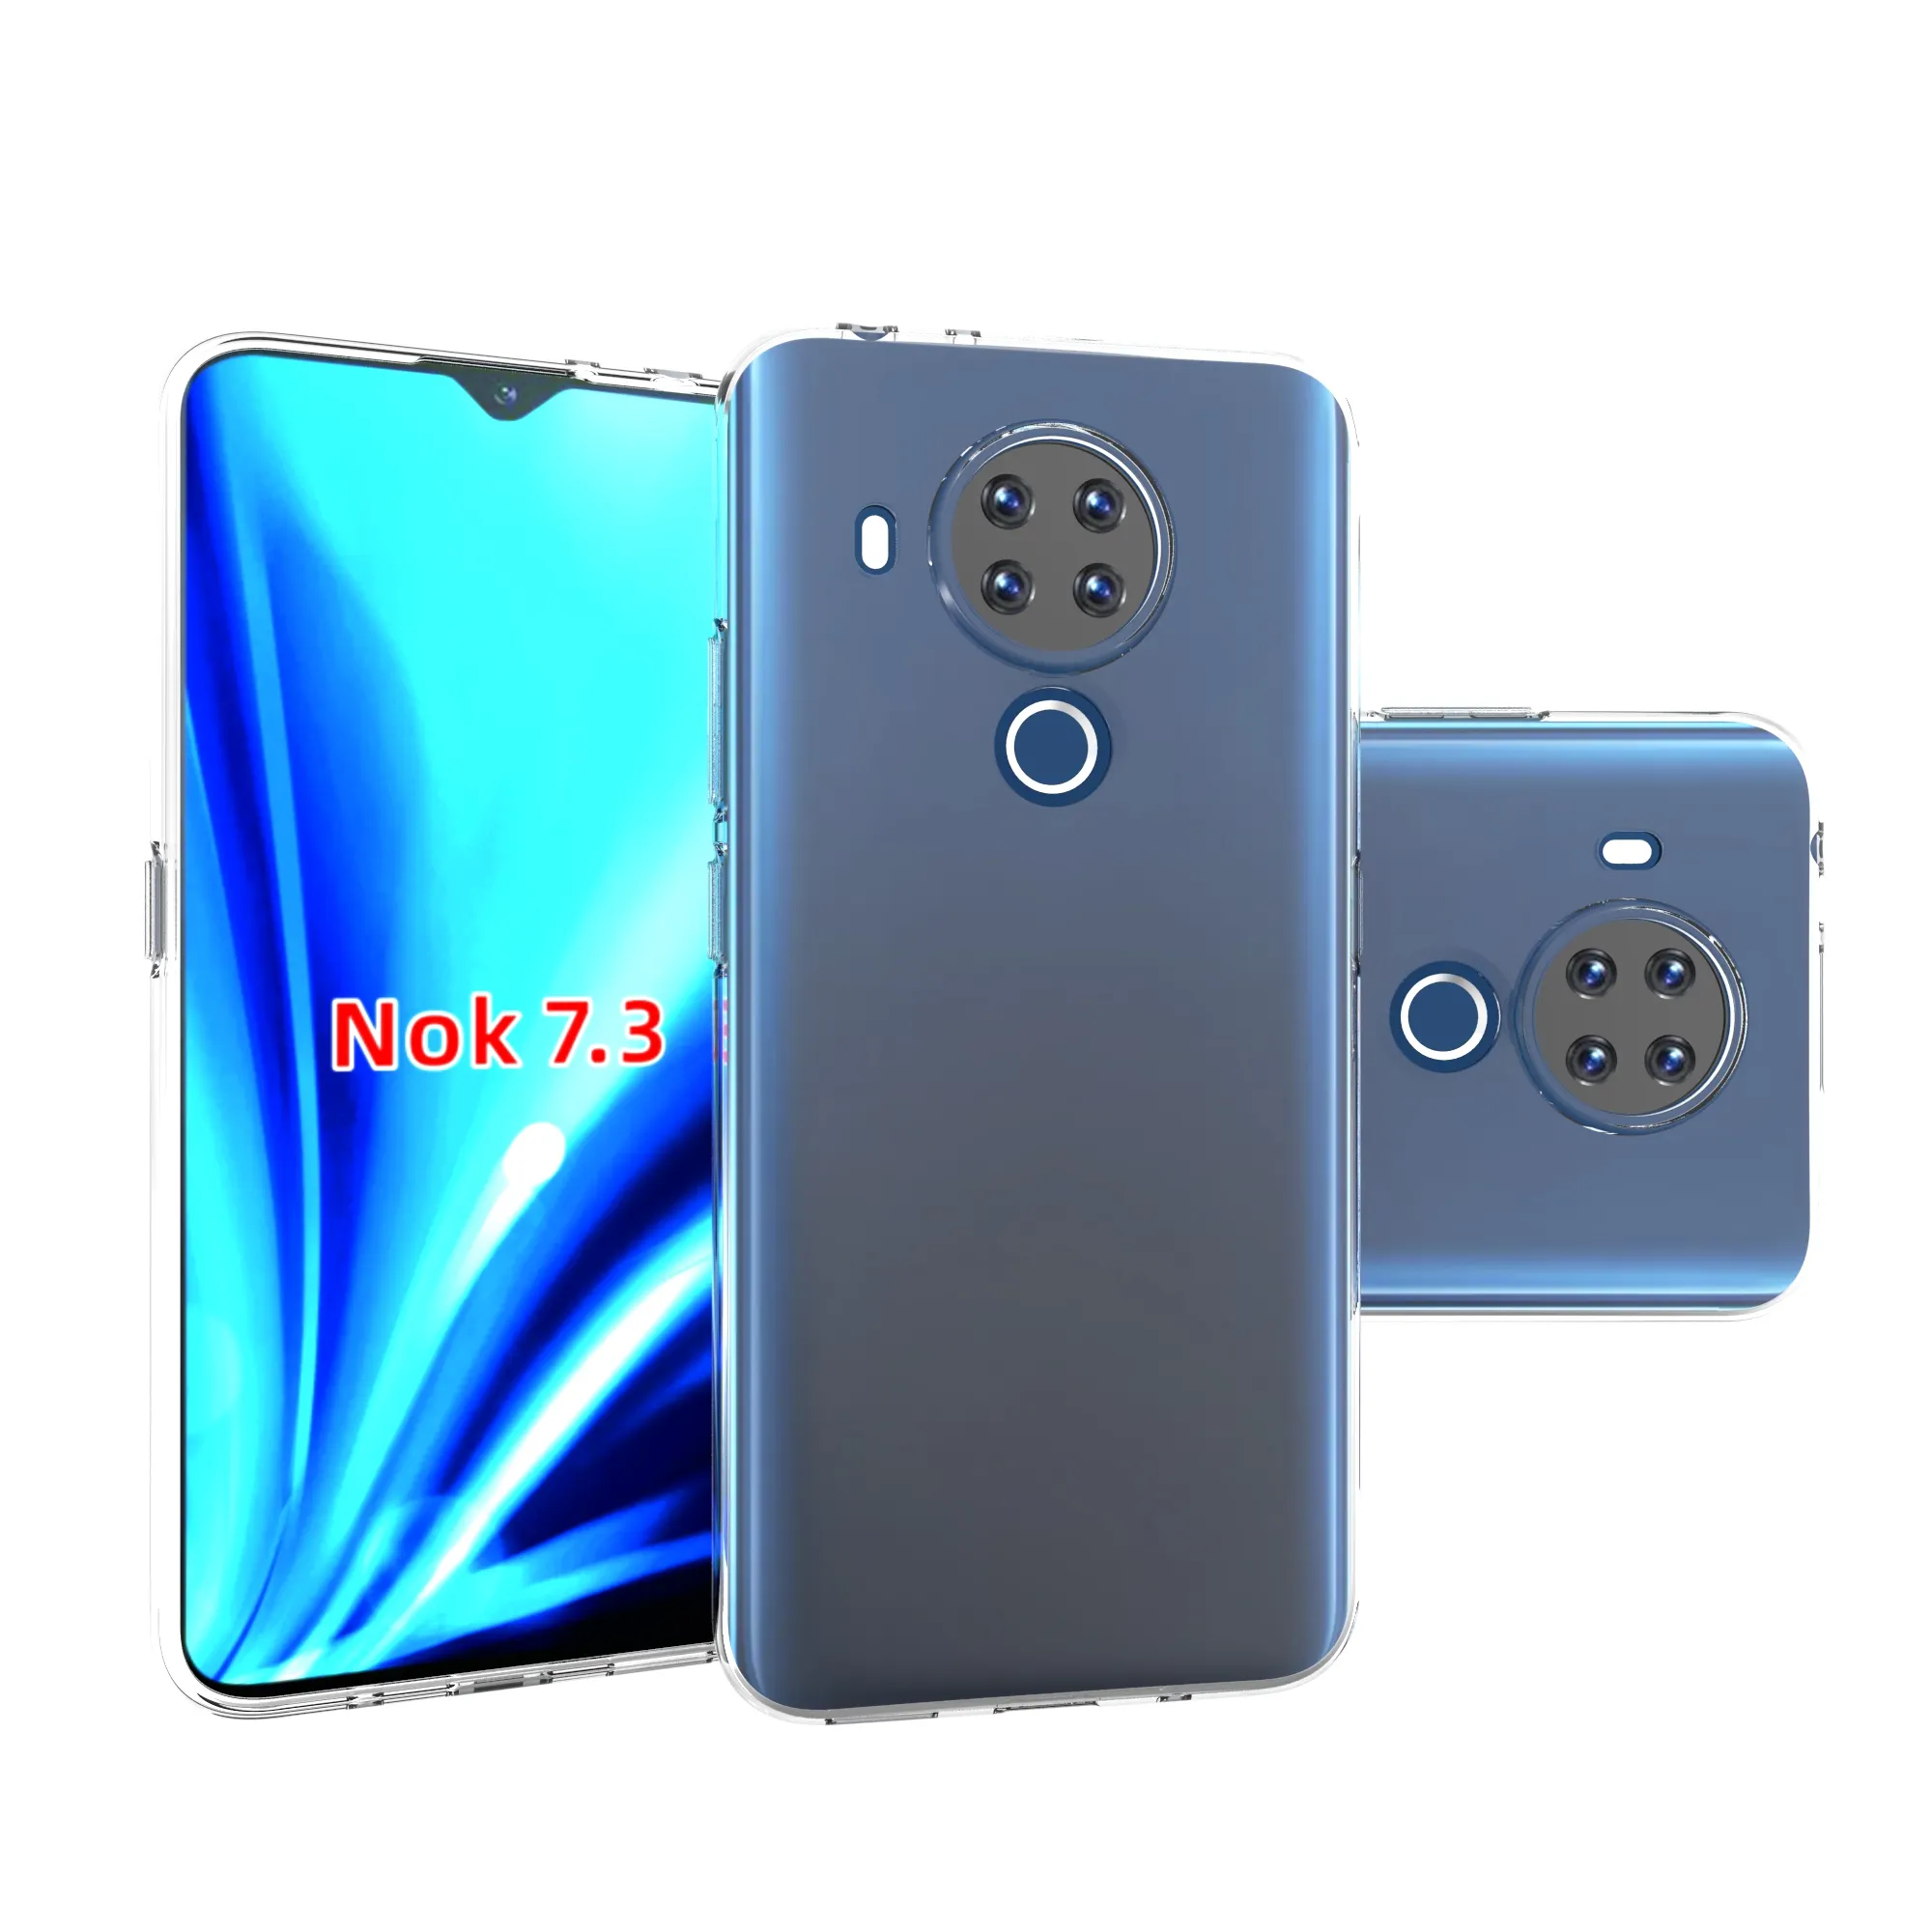 For Nokia 5.1 6.1 7 Plus Silm Soft Tpu Silicon Full Clear Back Cover Case For Nokia 7.3 7.2 8.3